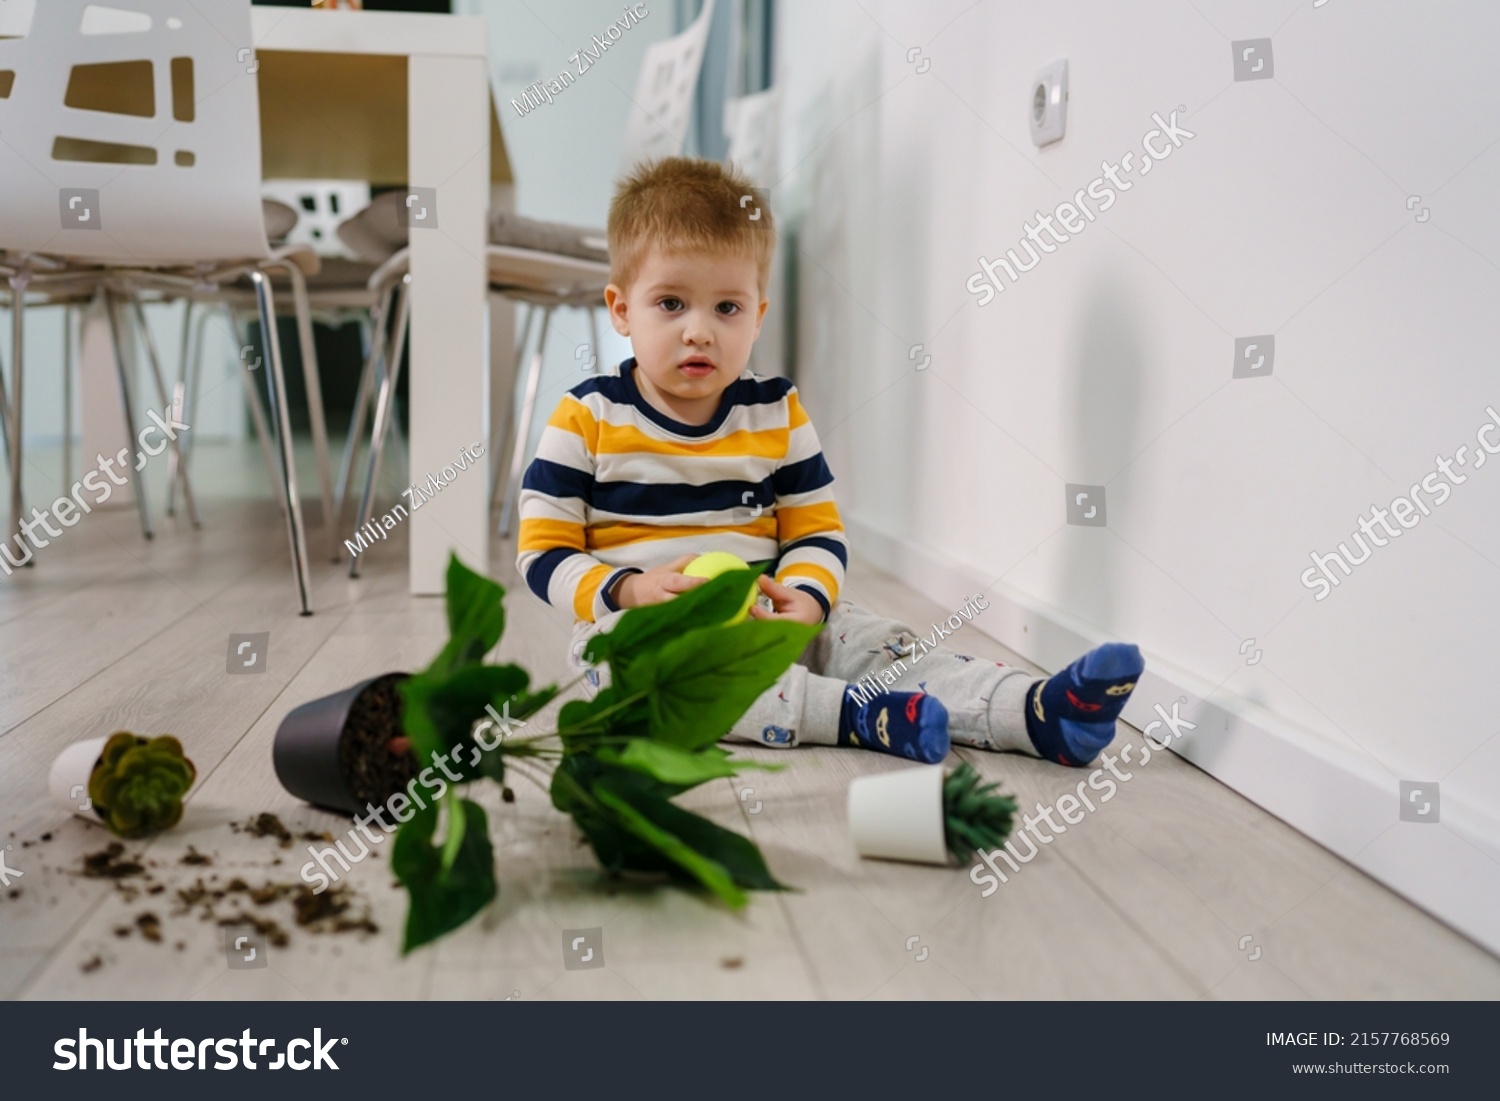 one caucasian boy making mess in the house playing and mischief with bad behavior flower pot damaged on the floor naughty kid at home childhood and growing up misbehavior concept #2157768569